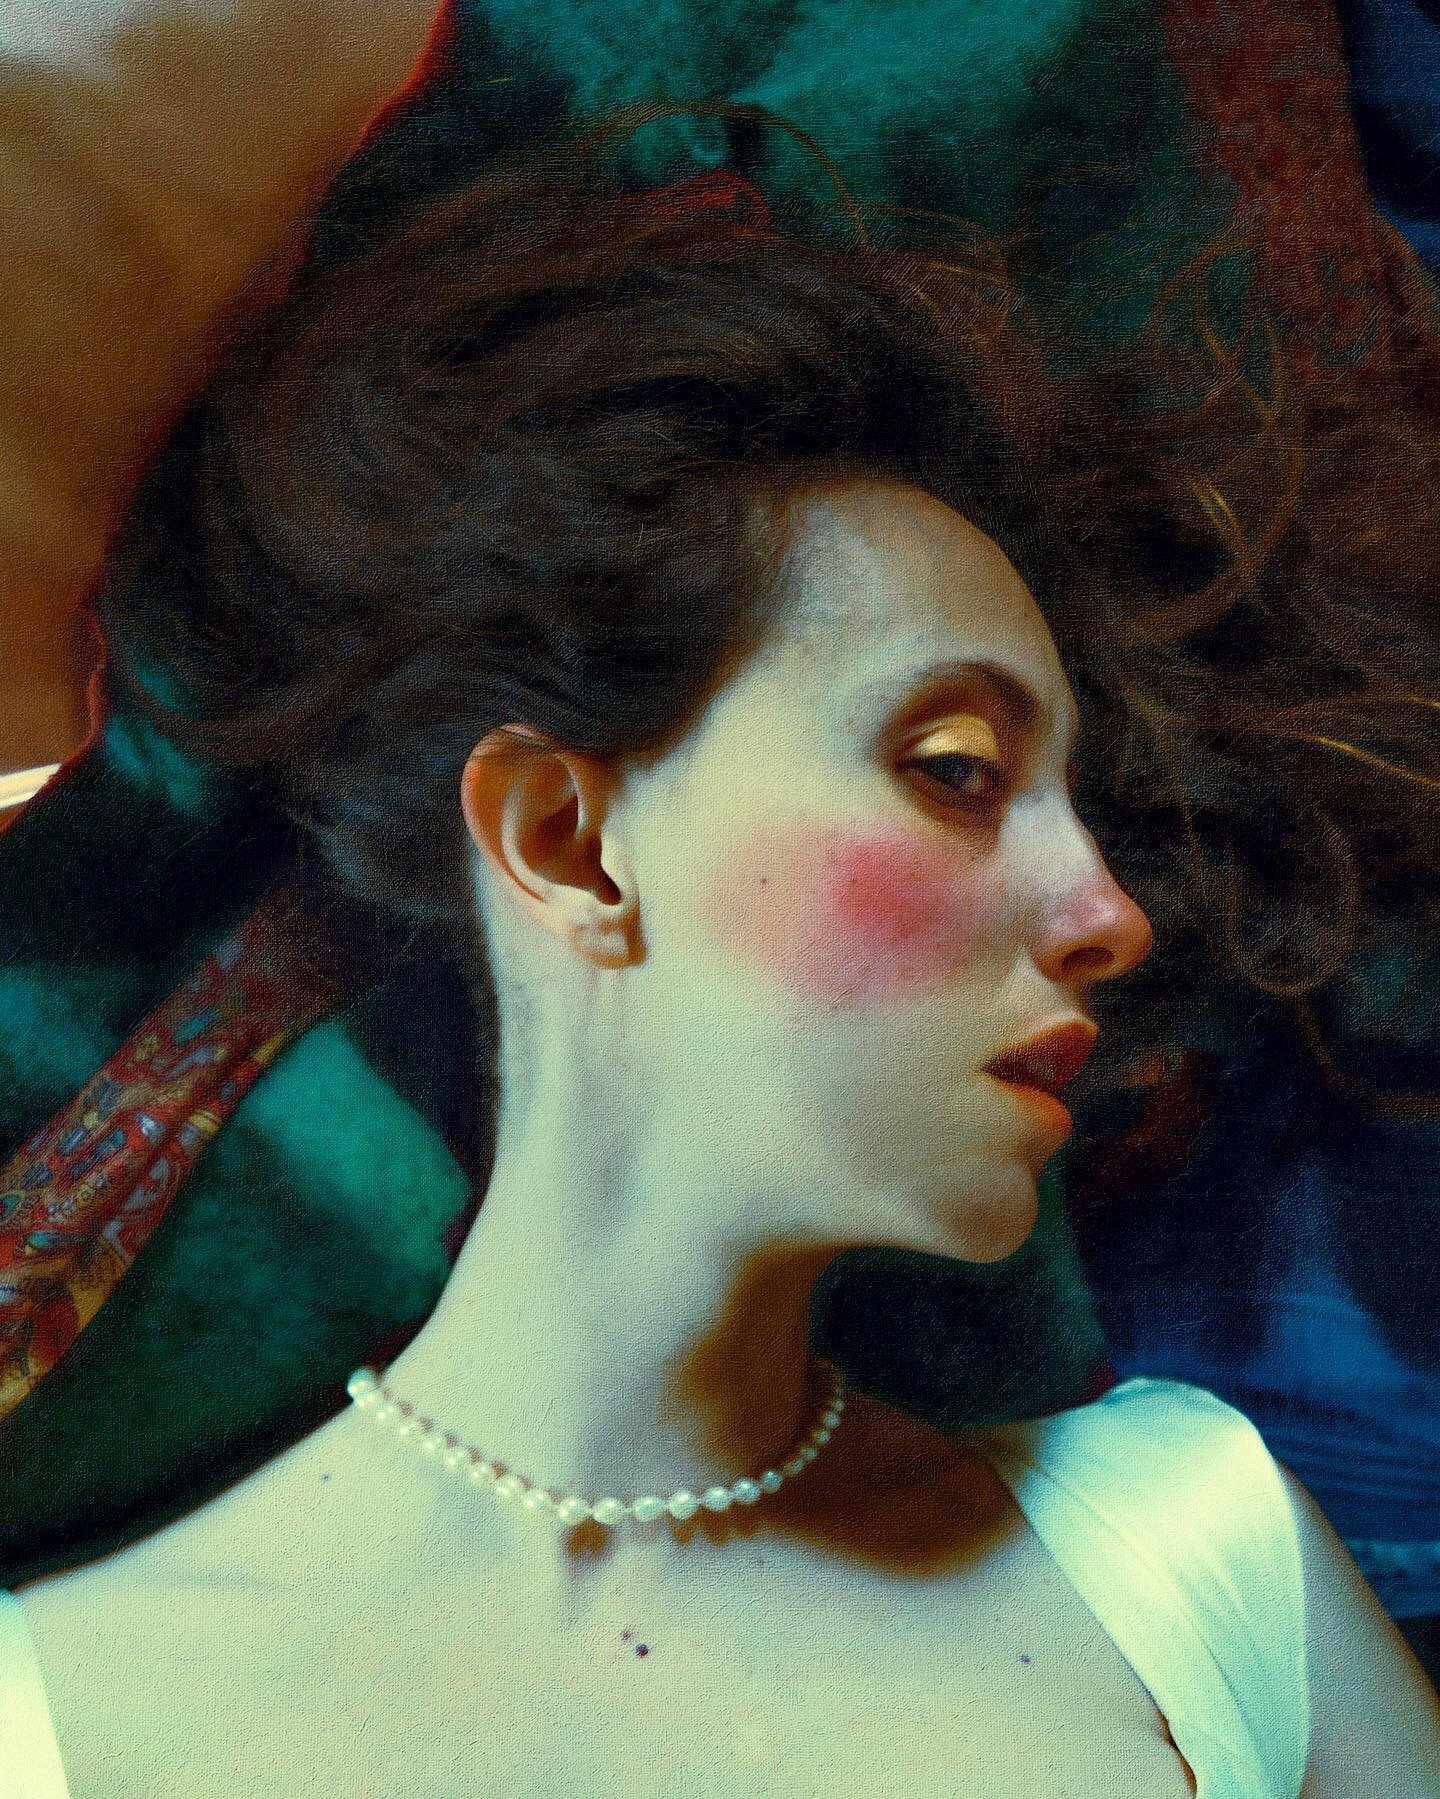 Gold for Klimt, red for Liepke.
Self-Portrait photography with a little love and solitude. 

#pearl #fineartphotography #lensculture #portraitmood #dergreif #painterlyphotos #painterlyphotography #selfportrait  #photovogue #blushed #artsharela #malco